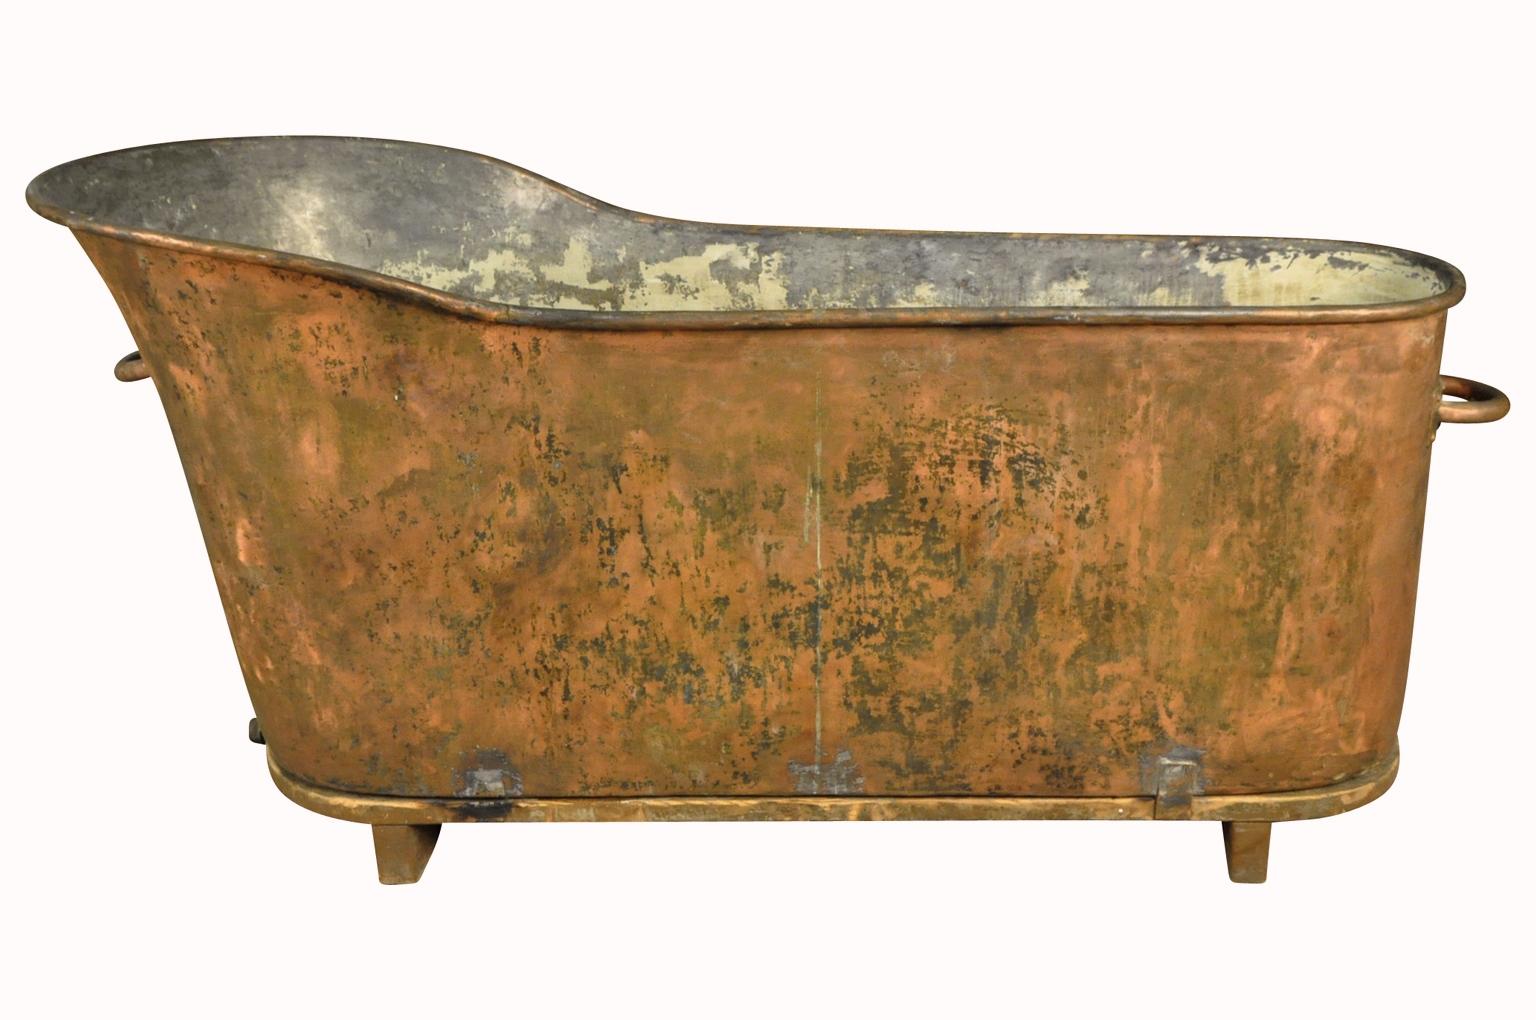 A fabulous later 19th century bathtub from the South of France. Wonderfully constructed from heavy gauge copper and raised on its wooden platform. Terrific not only as a bathtub, but serves beautifully as a planter or to ice down beverages for a